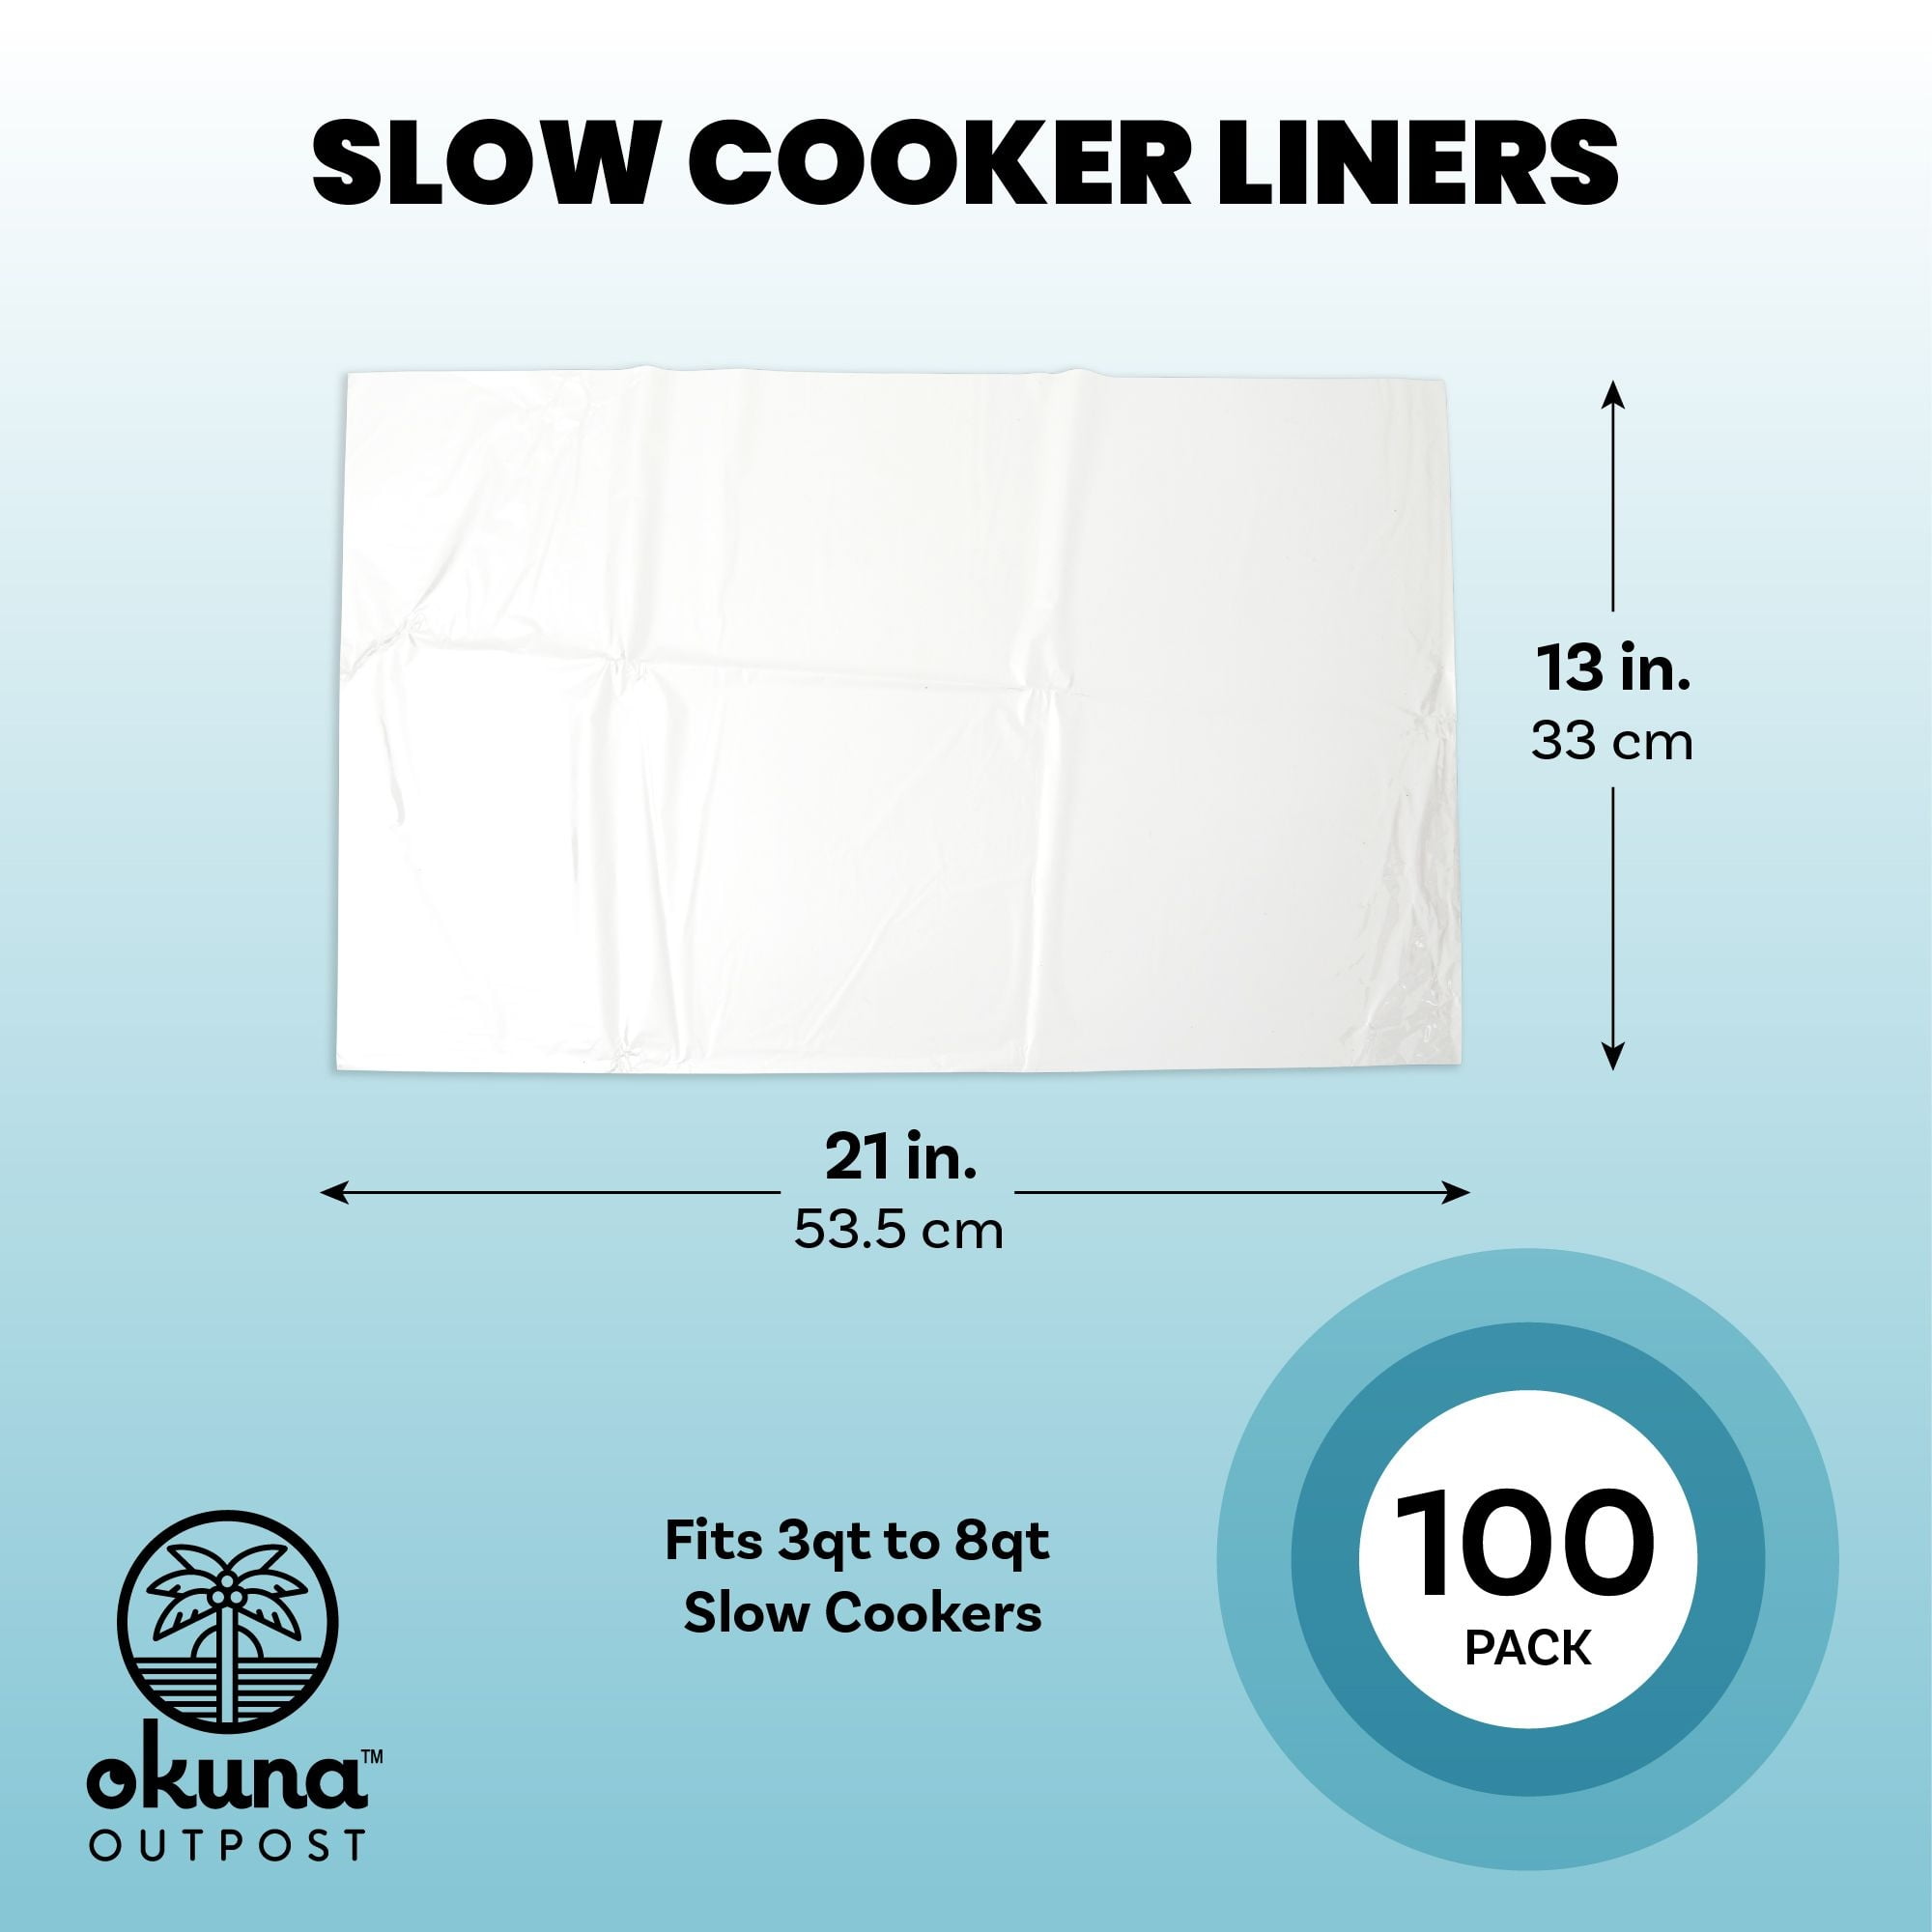 SLOW COOKER LINERS 2PK IN COLORBOX 60PC FLR DISPLAY MADE IN USA21